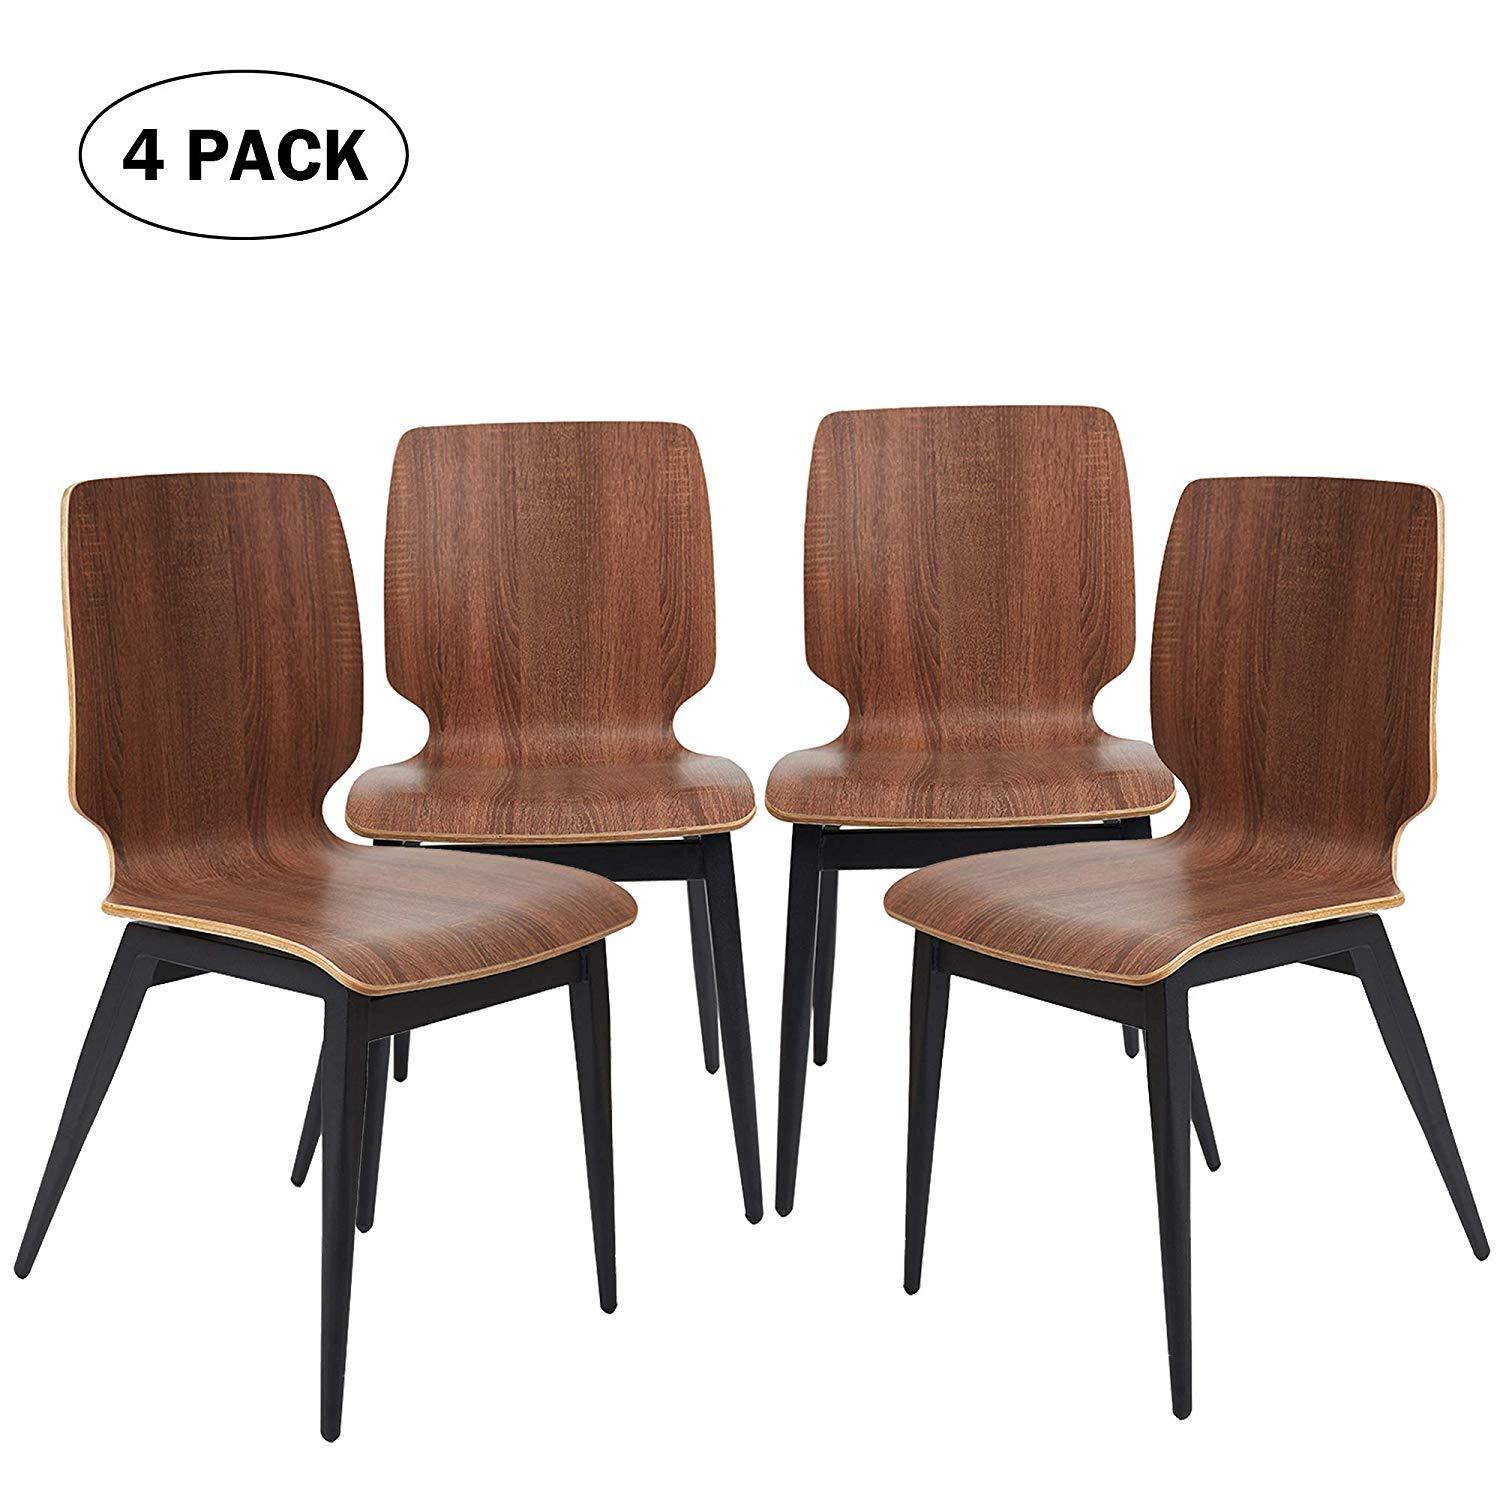 Bosonshop 4 Set Modern Dining Chairs Wooden Kitchen Side Chairs with Metal Legs